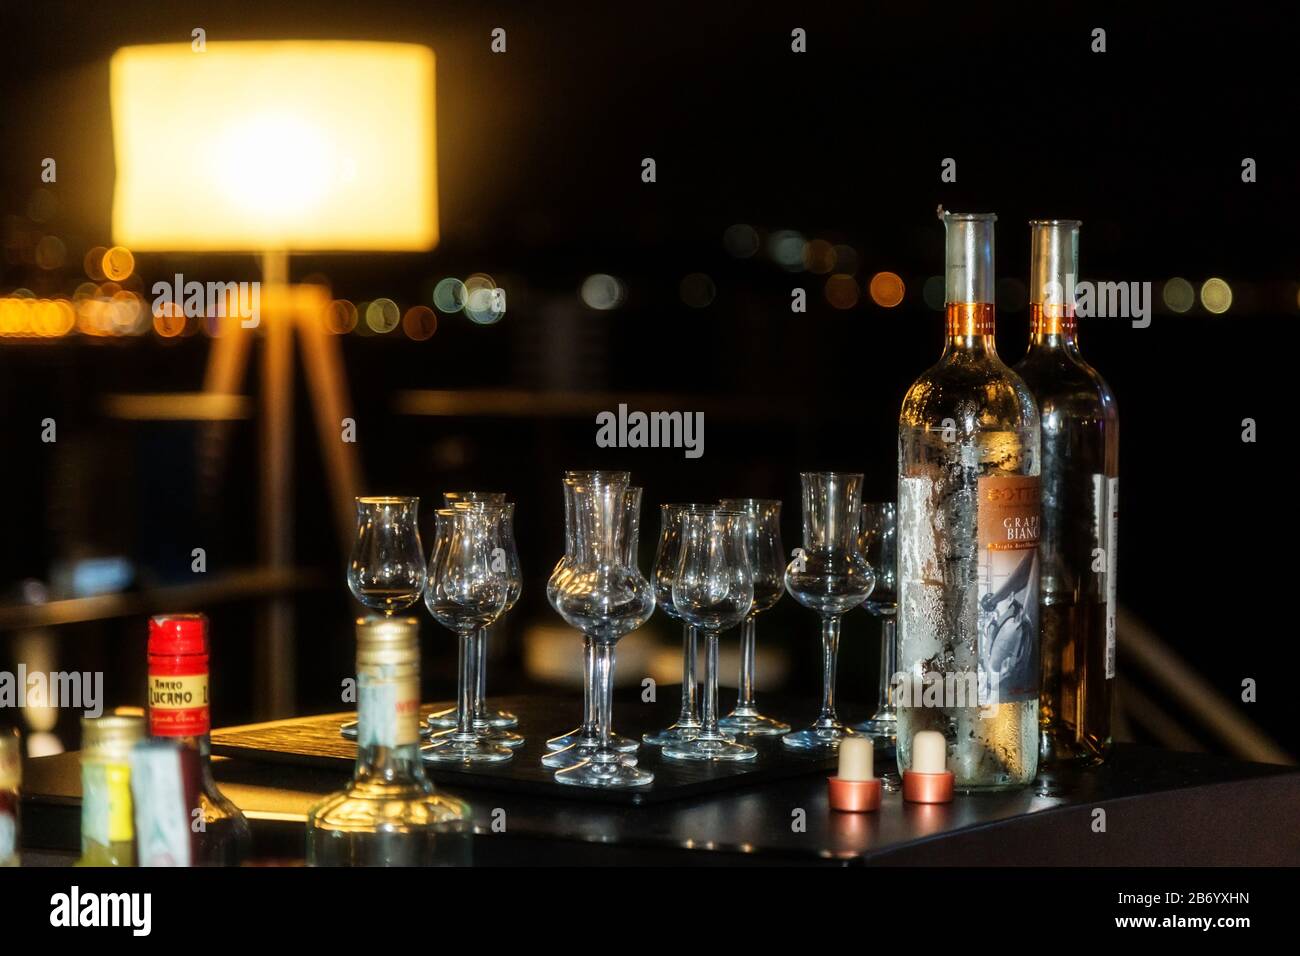 Night scenes with various Bottles and glasses of alcohol and spirits at a bar. Large variety of imported and domestic labels. Stock Photo